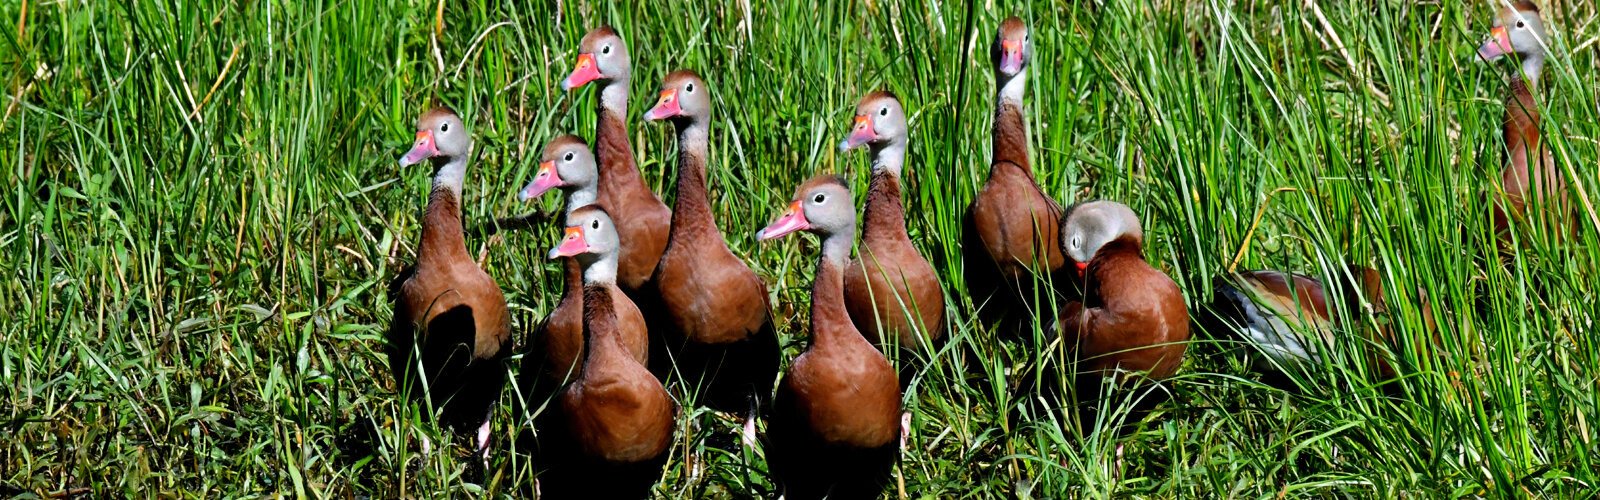 The tremendous bird population of the nature reserve includes flocks of black-bellied whistling ducks, fun to watch and listen to.